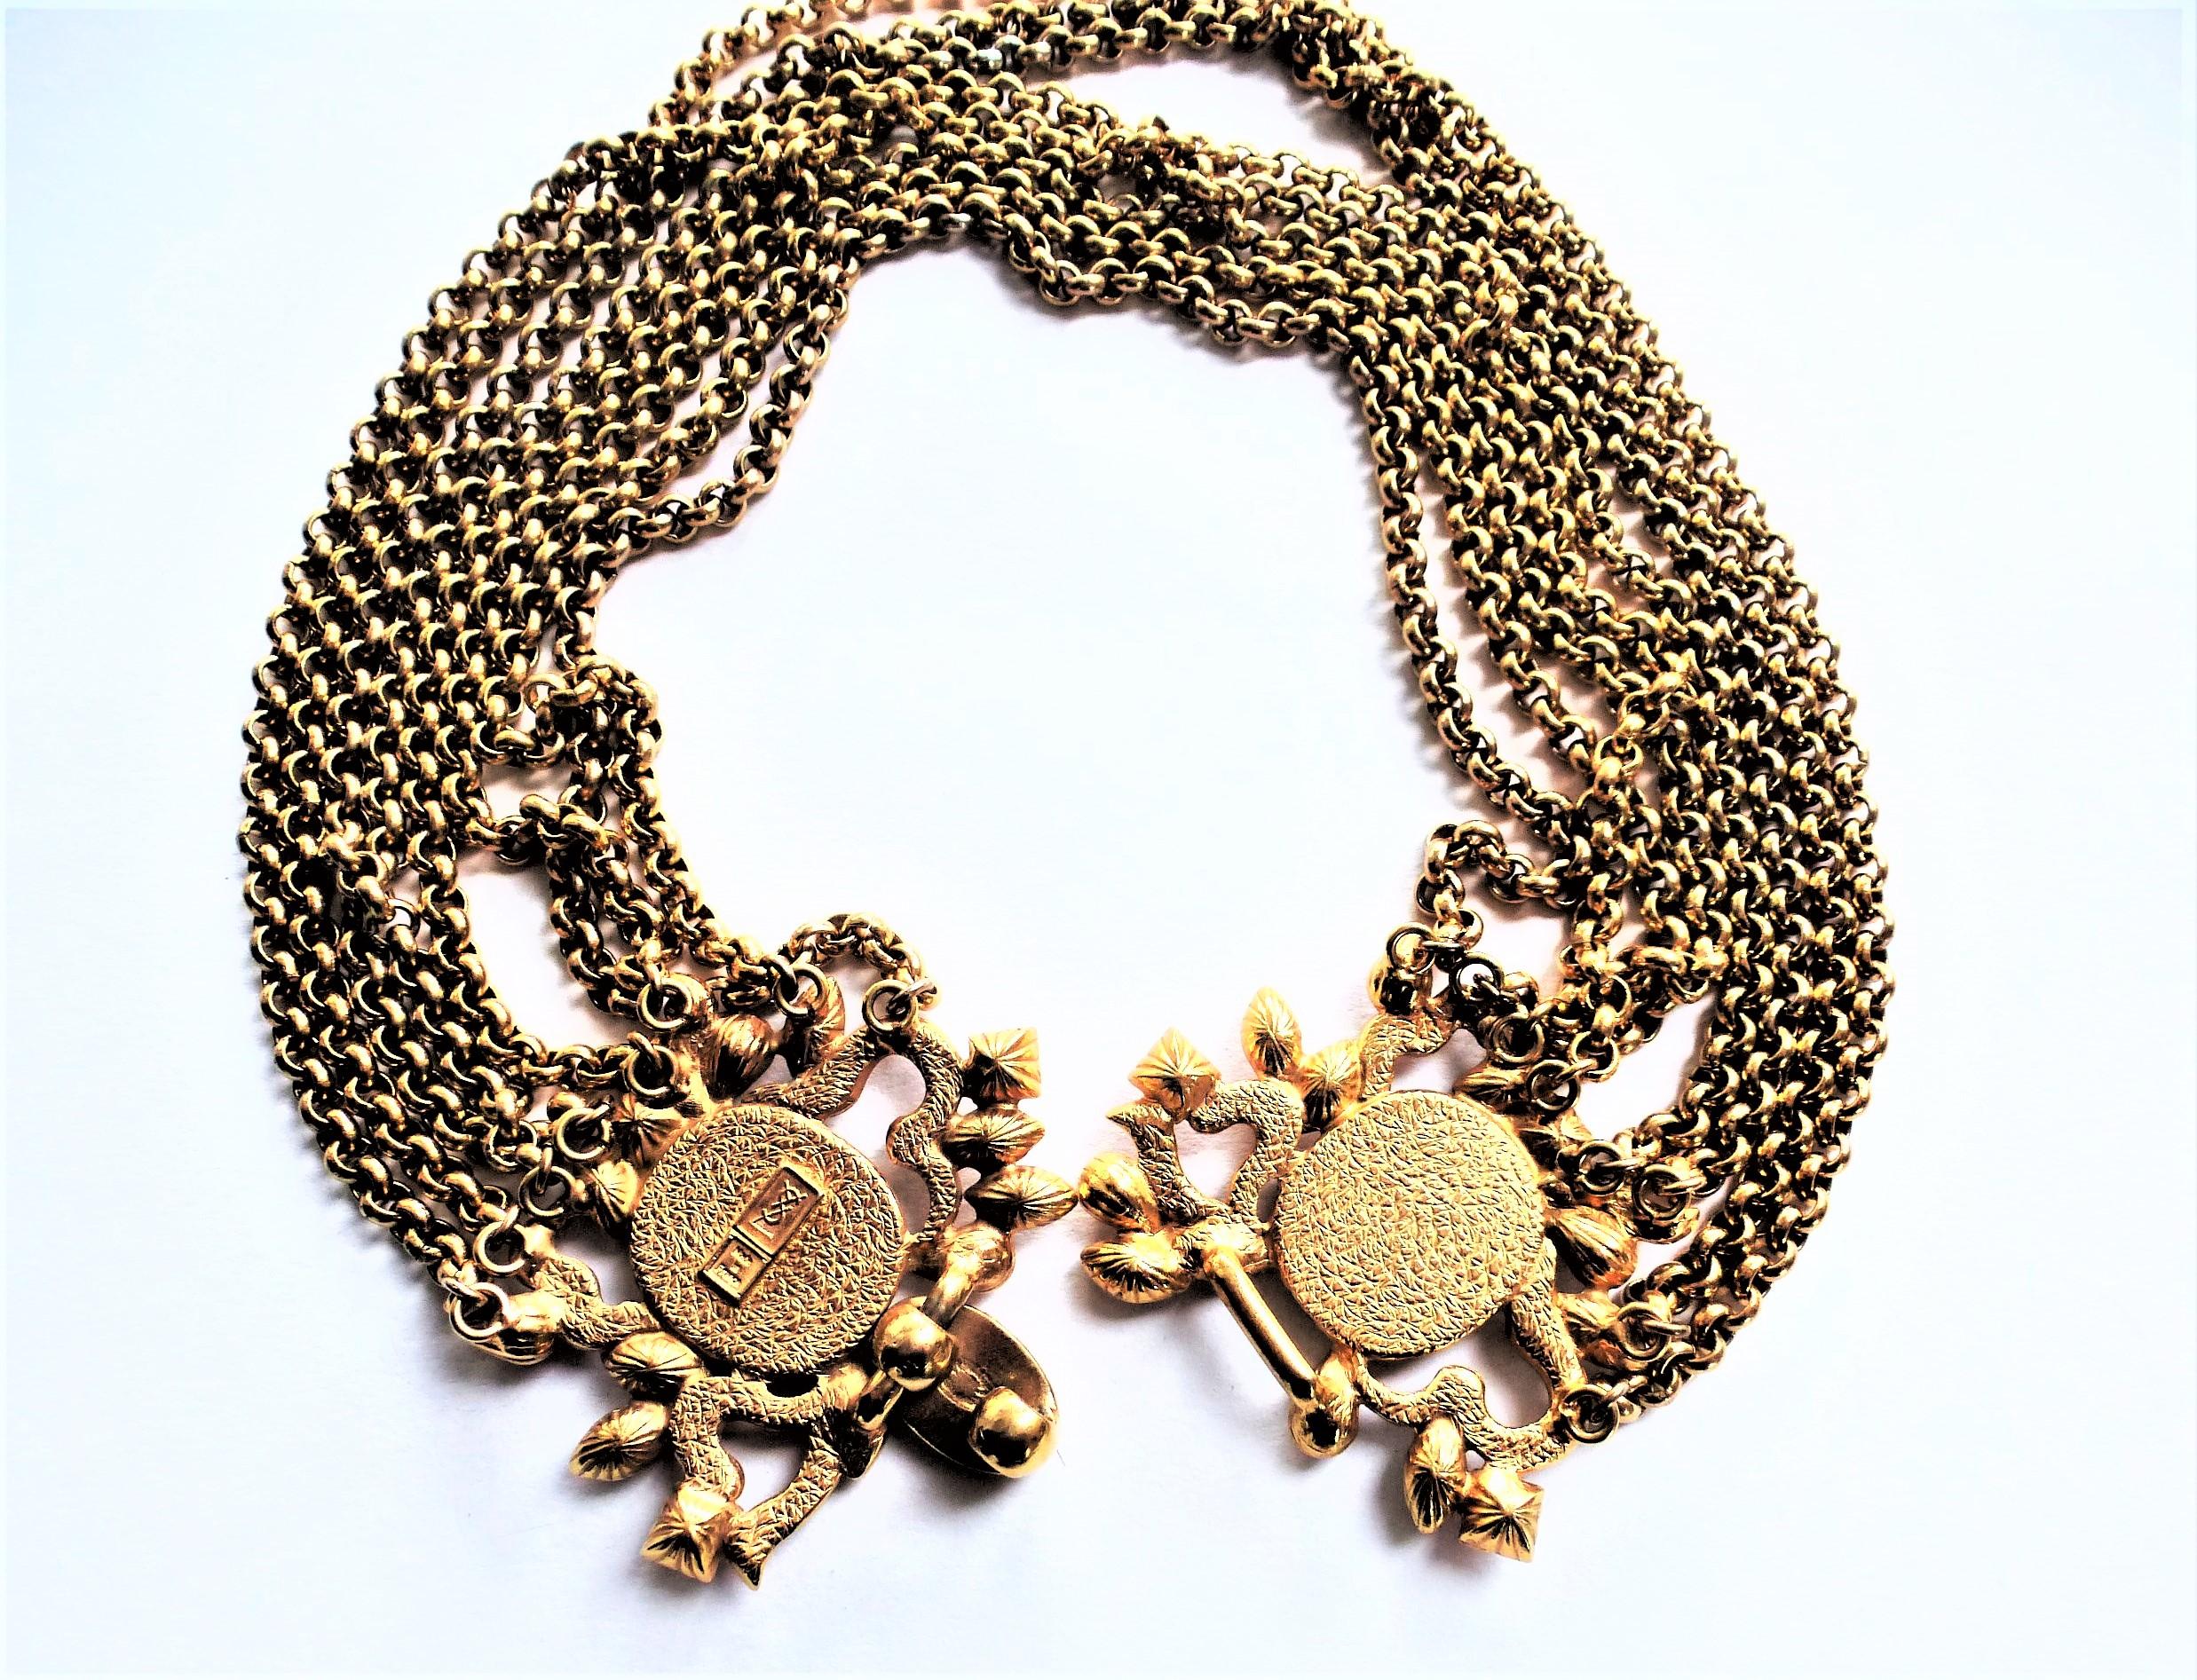 Marquise Cut Yves Sant Laurent chain necklace made by R. Goossens Paris gold plated 70's